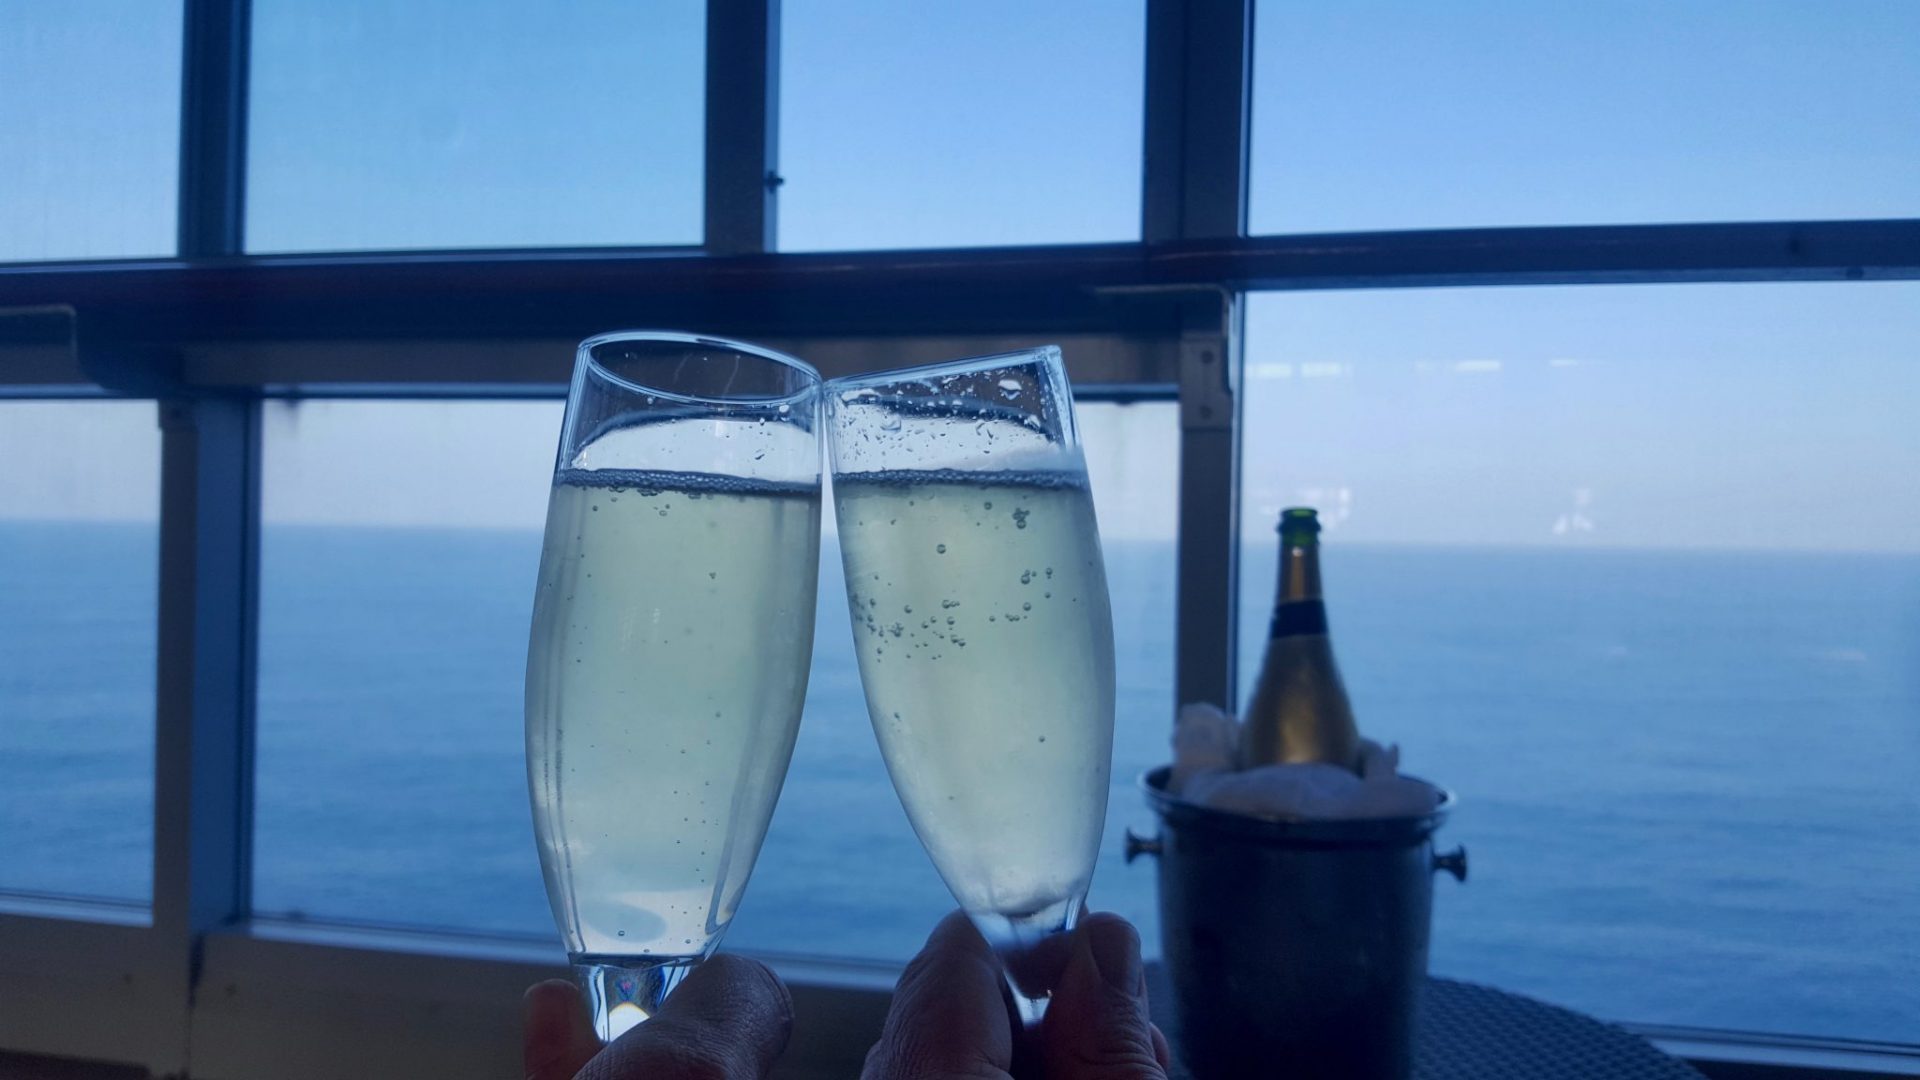 Drinking free champagne won during a game on a cruise